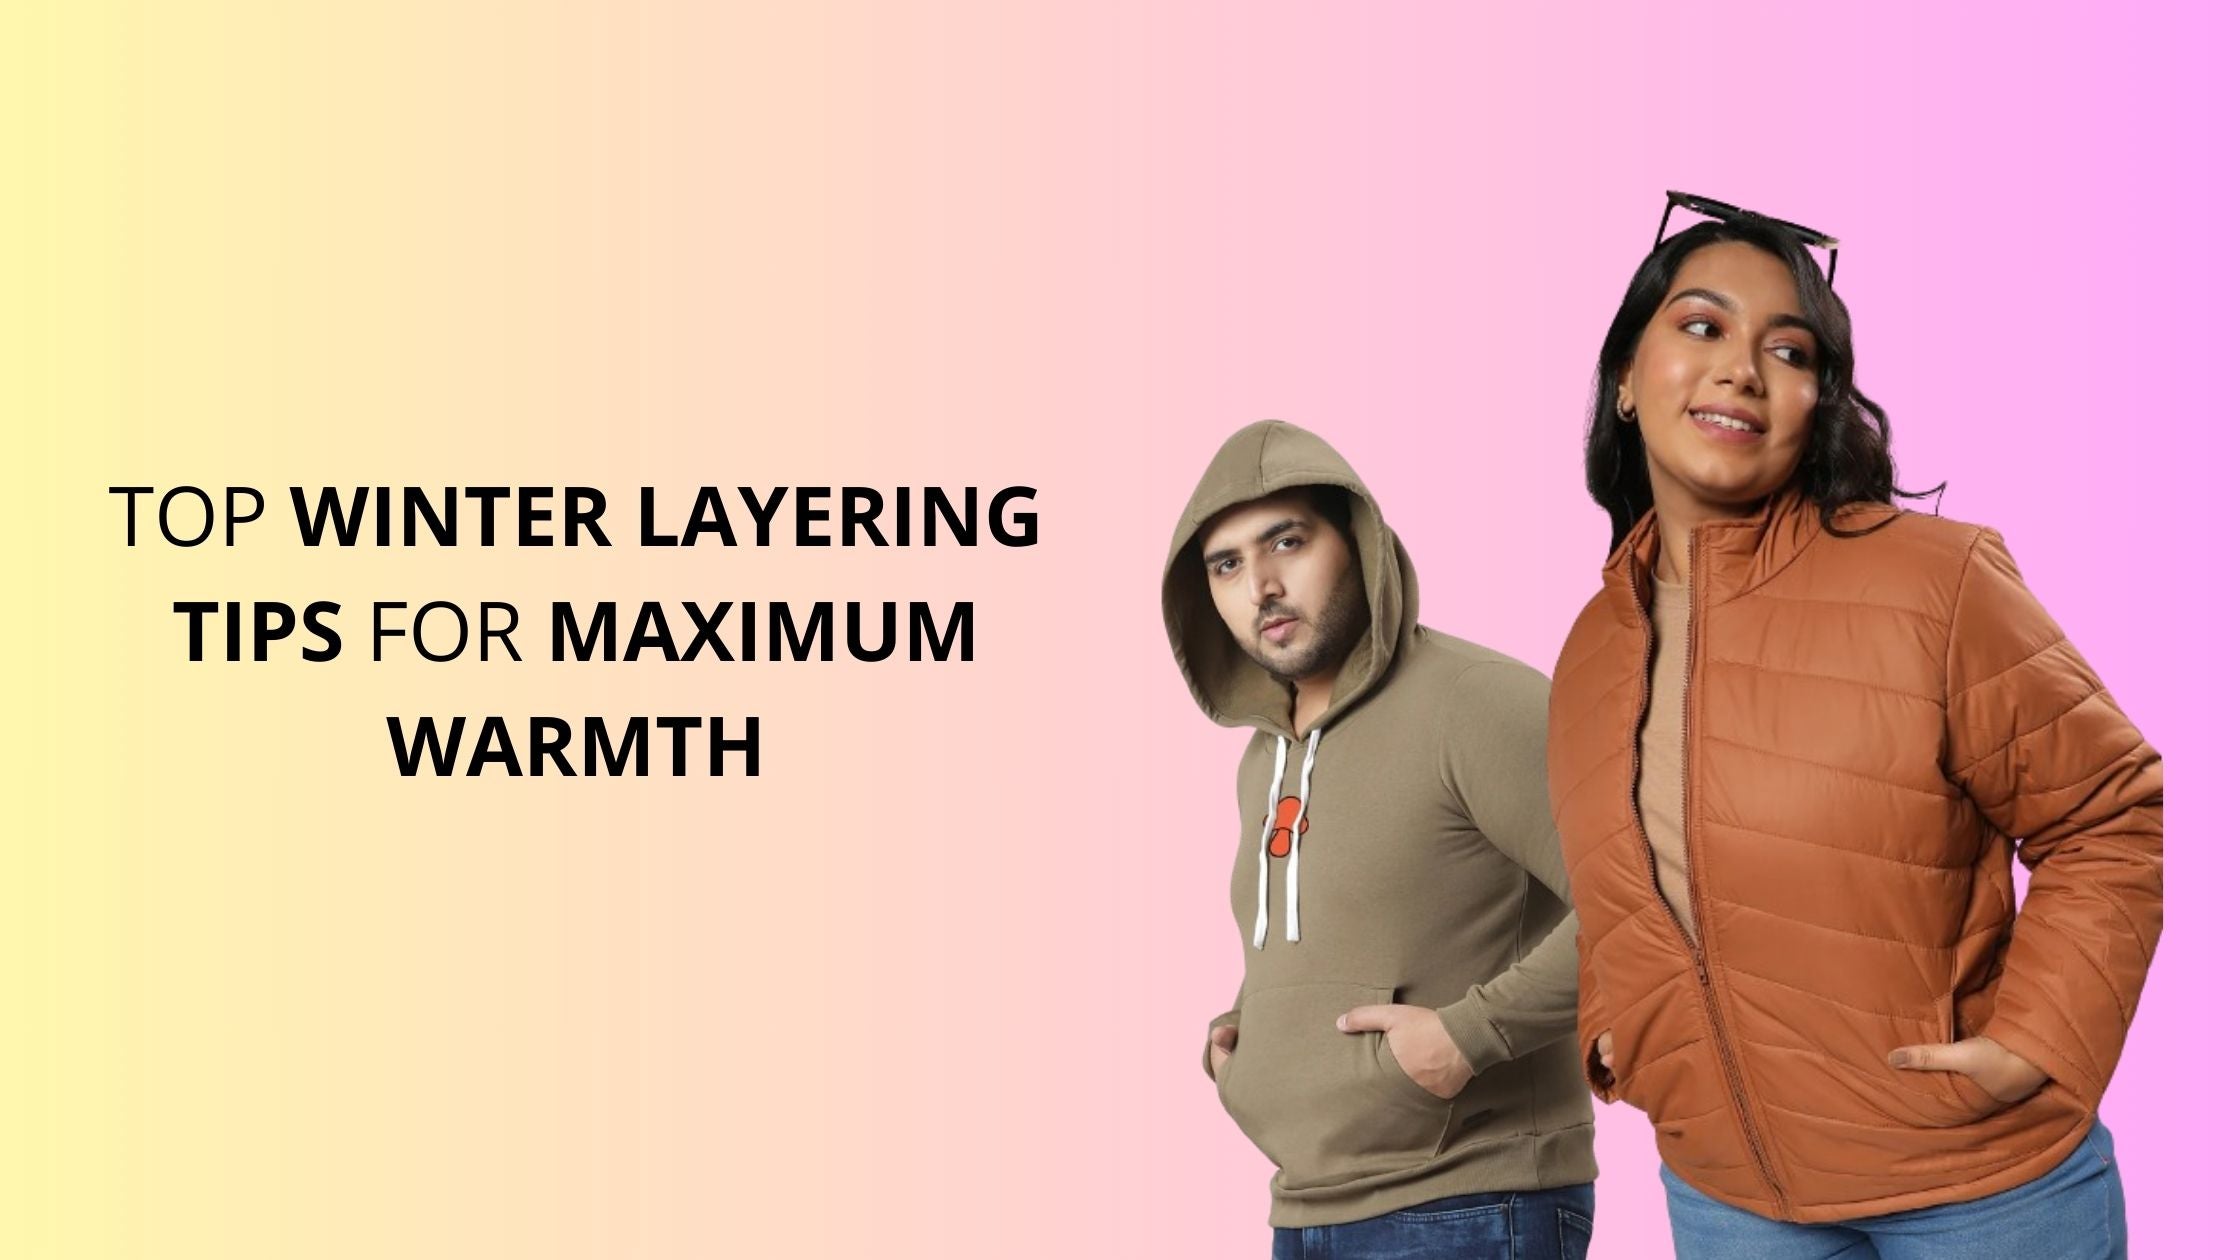 Top Winter Layering Tips for Maximum Warmth